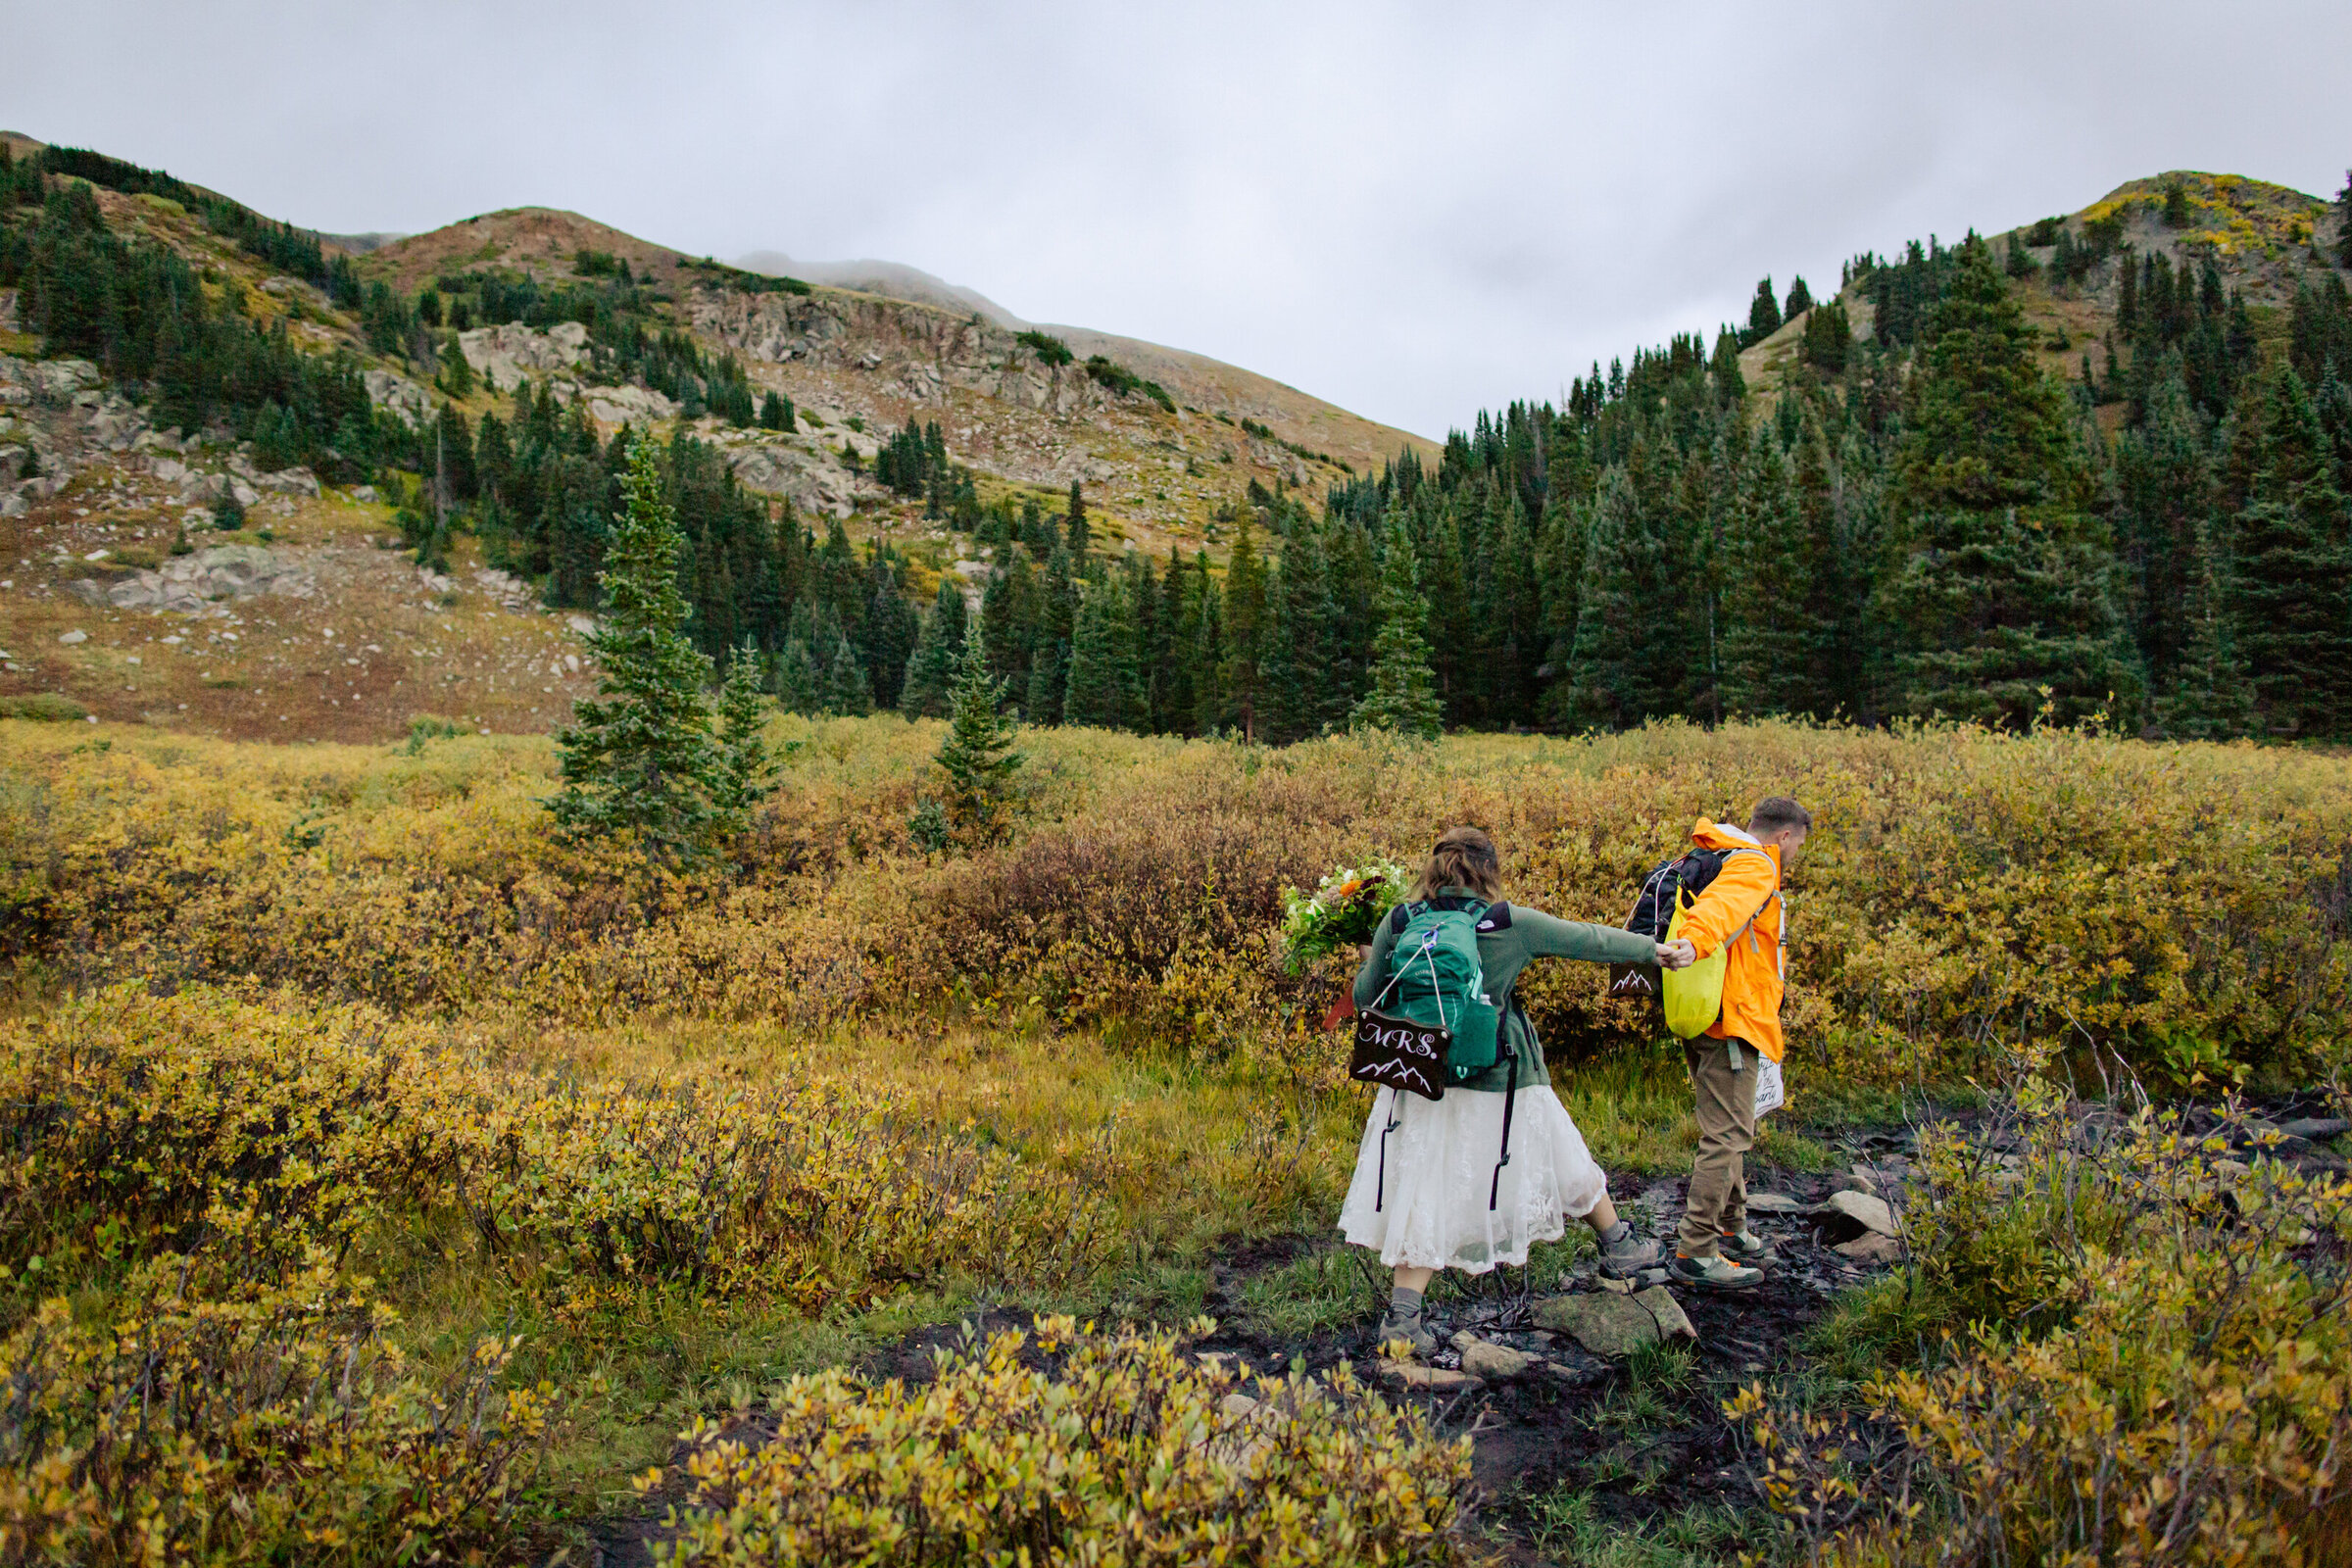 Groom leads bride down a hiking trail after their wedding ceremony